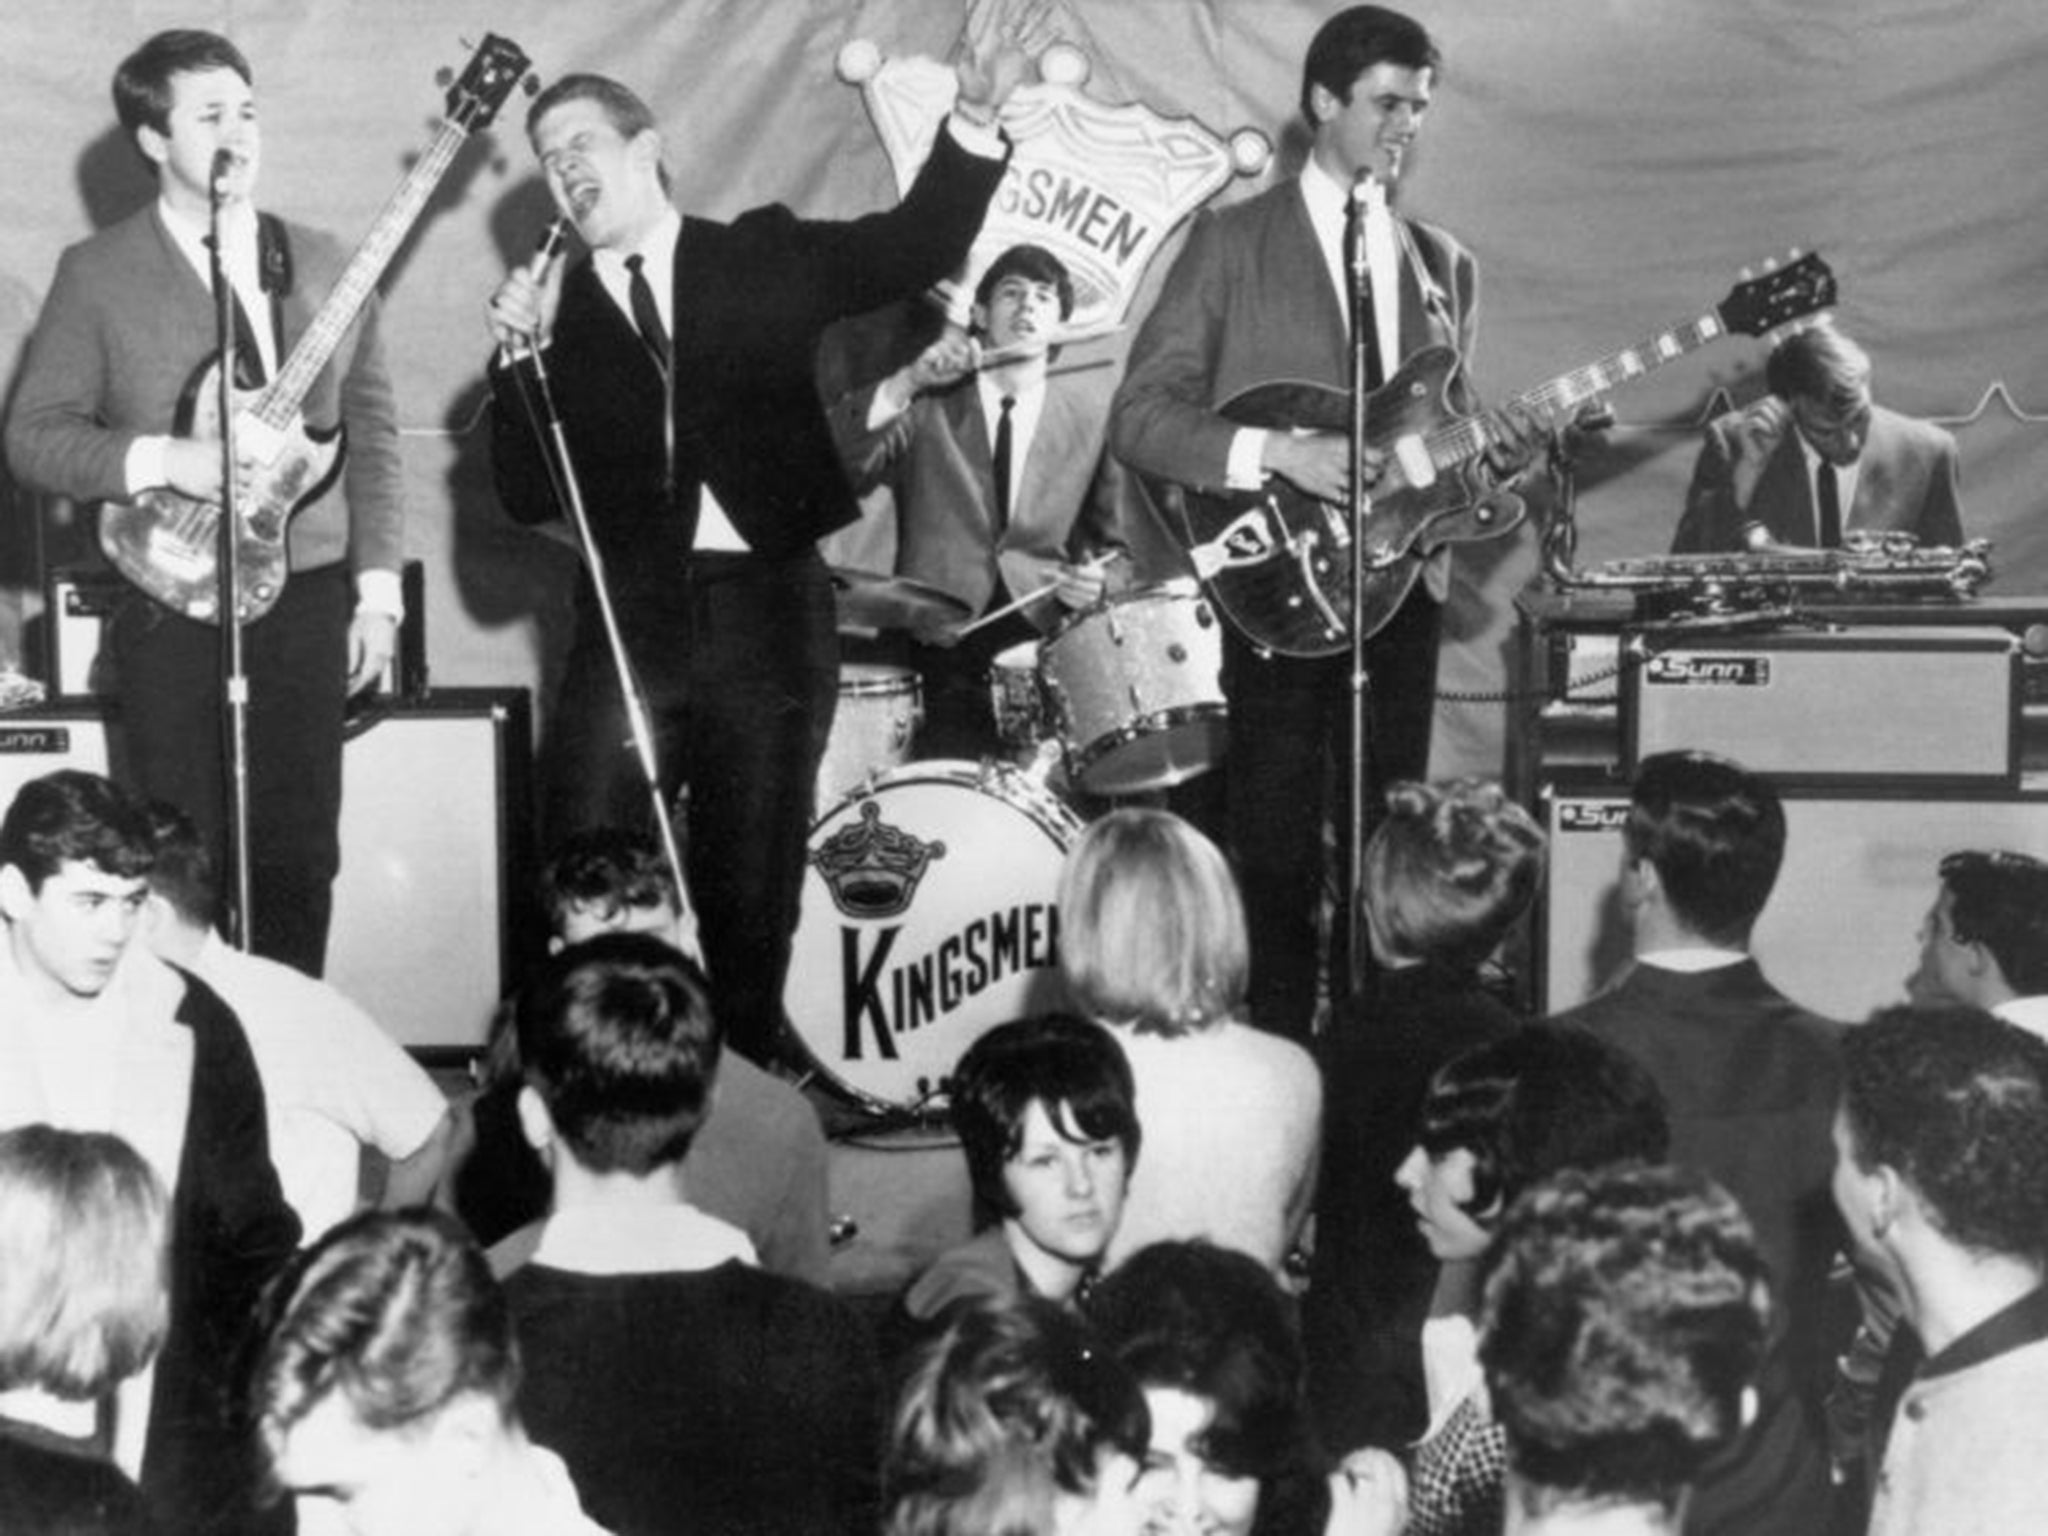 Ely and the Kingsmen: they fell out as the record rose up the charts, and a legal battle ensued